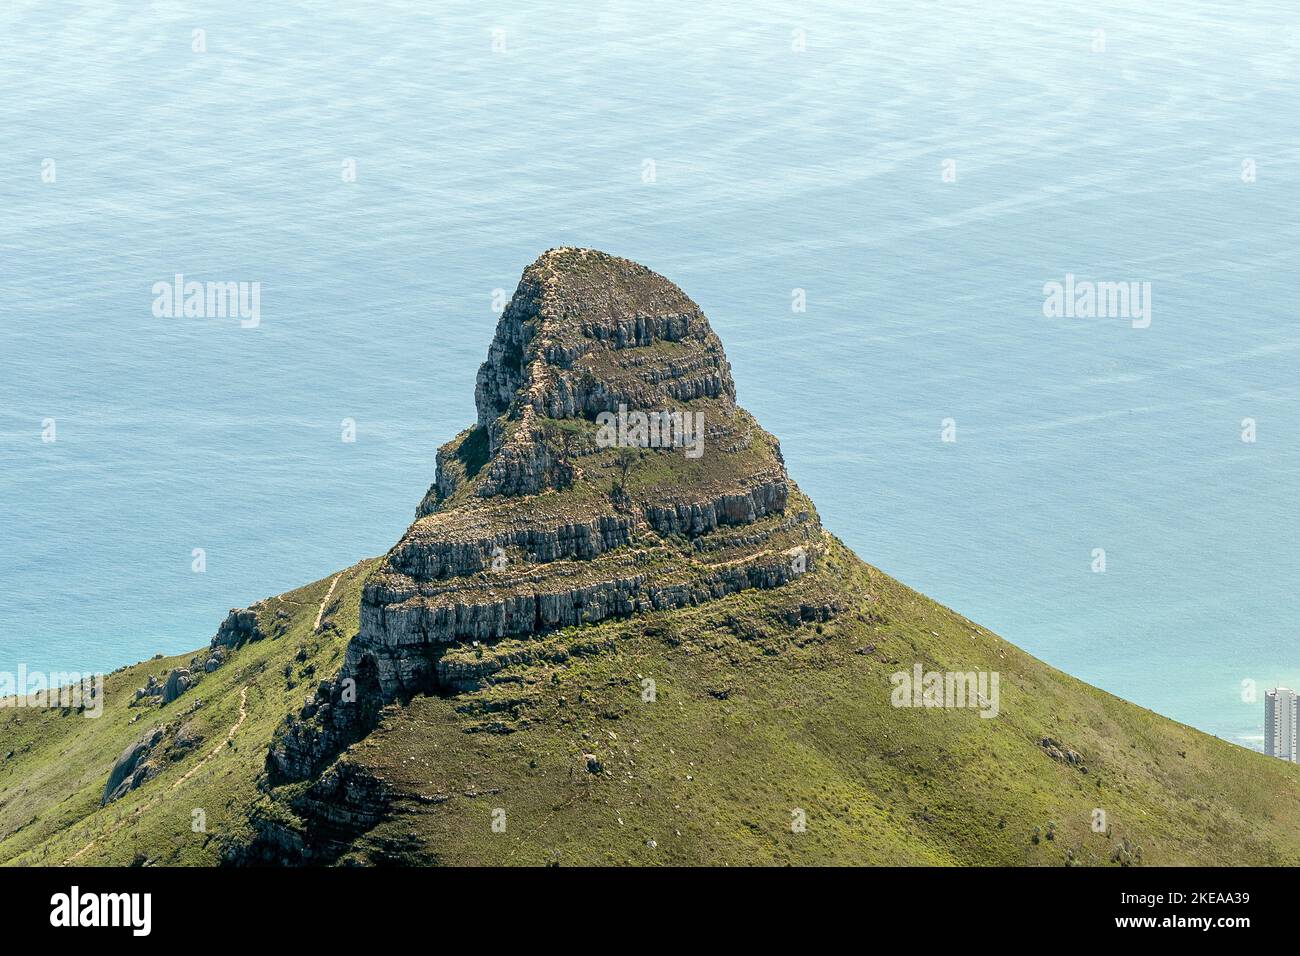 Lions Head as seen from Table Mountain in Cape Town. The hiking trail to the top is visible Stock Photo